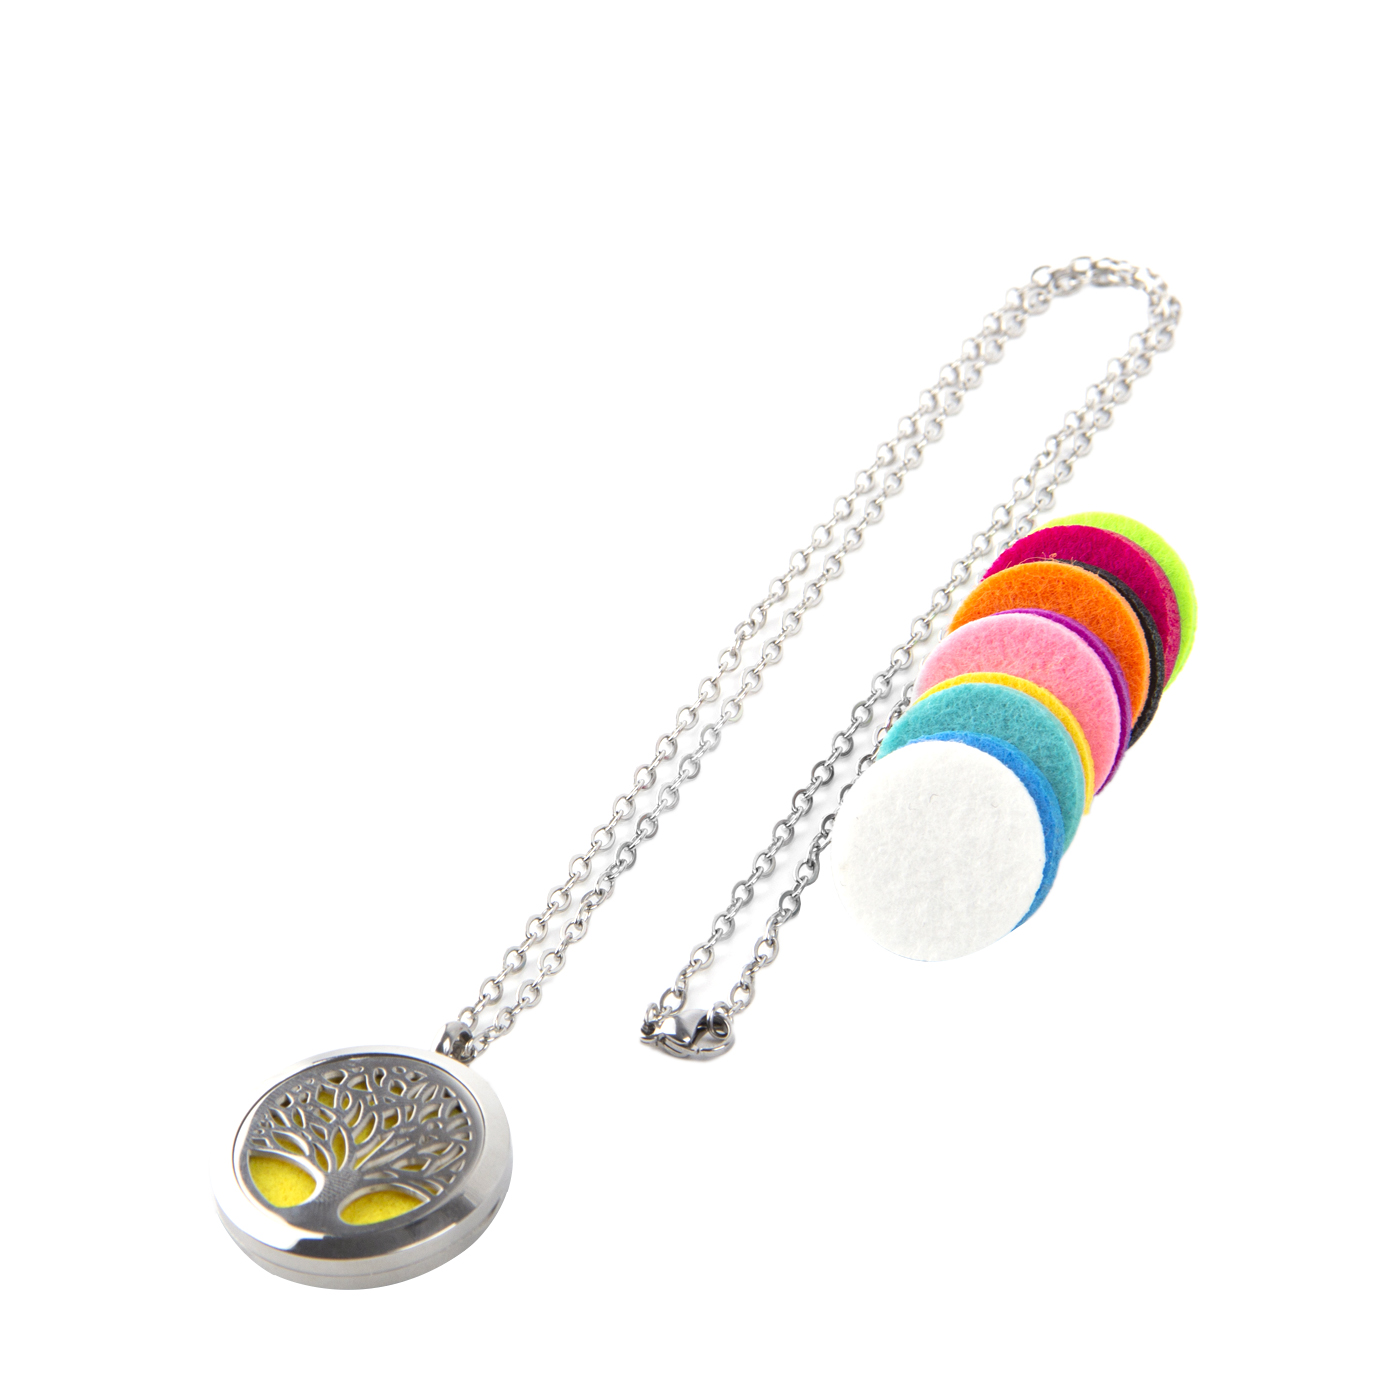 Stainless Steel Hollow Essential Oil Diffuser Necklace1